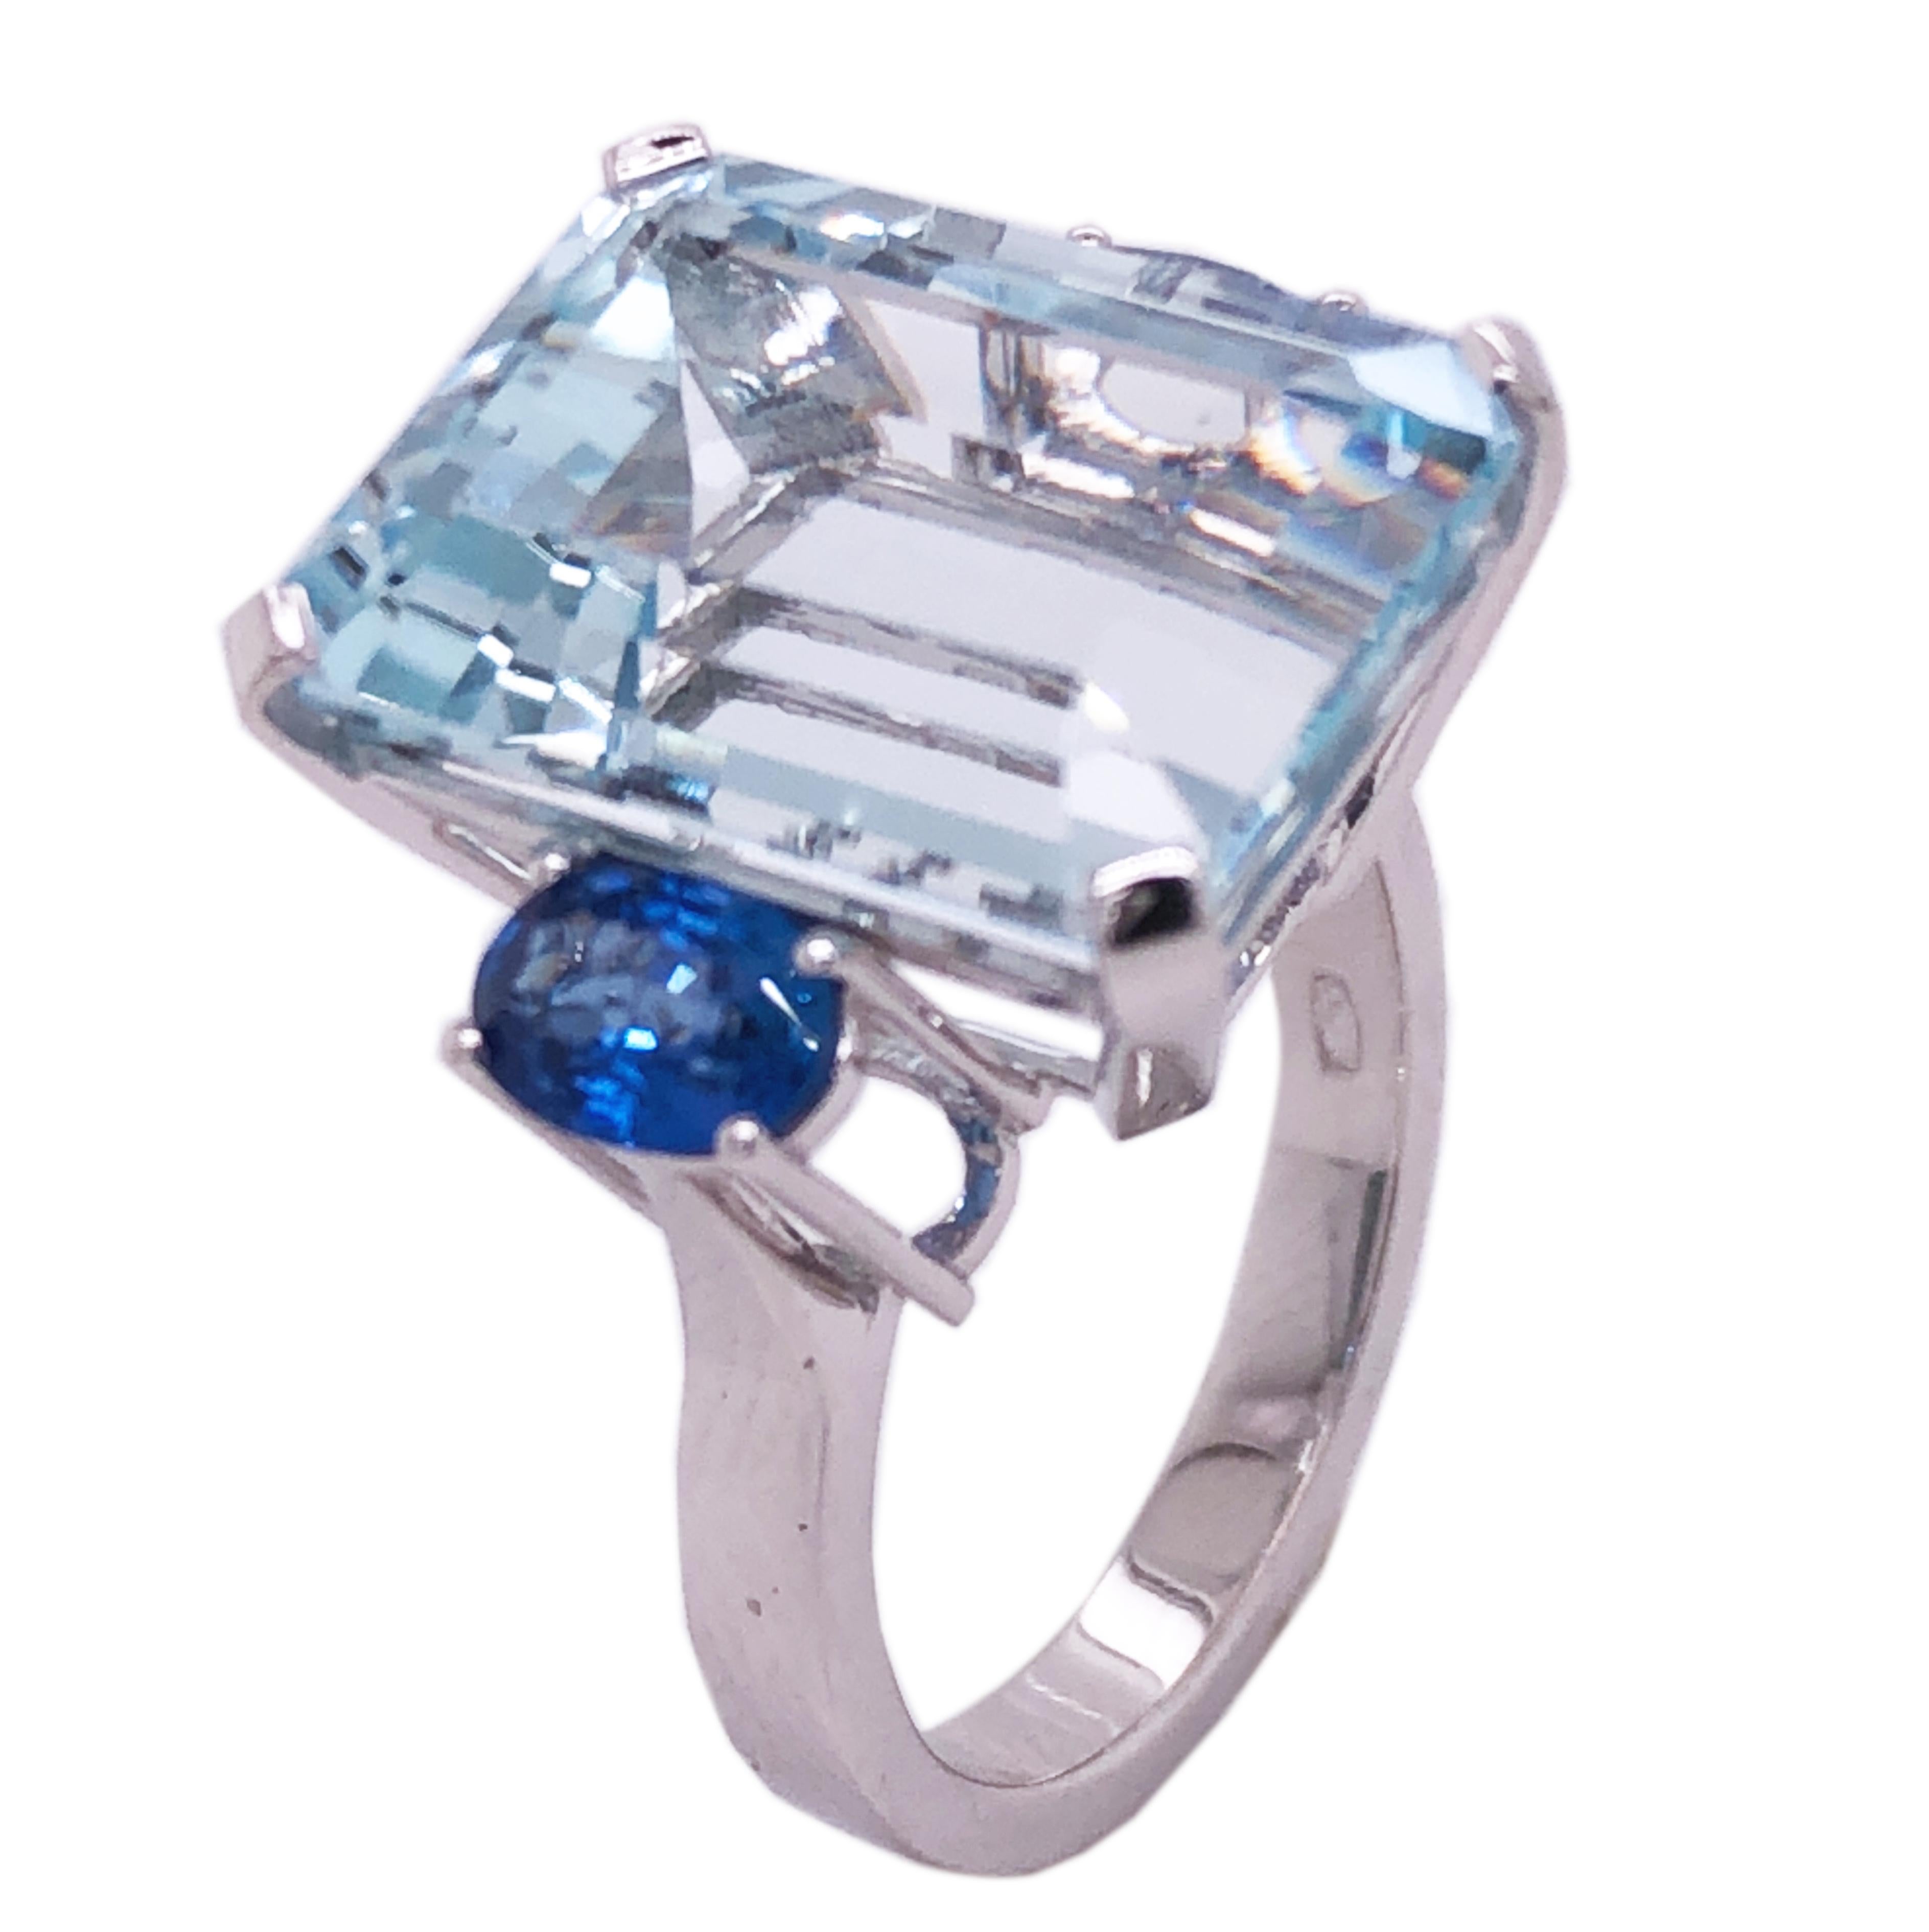 One-of-a-kind 12 Carat Emerald Cut Natural Brazilian Aquamarine(0.65in lenght 0.47in width, 16.5x11.9mm) in a Chic yet Timeless two 1.09 CaratNatural Ceylon Oval Blue Sapphire 18Kt White Gold Cocktail Setting.
We are proud to offer this awesome